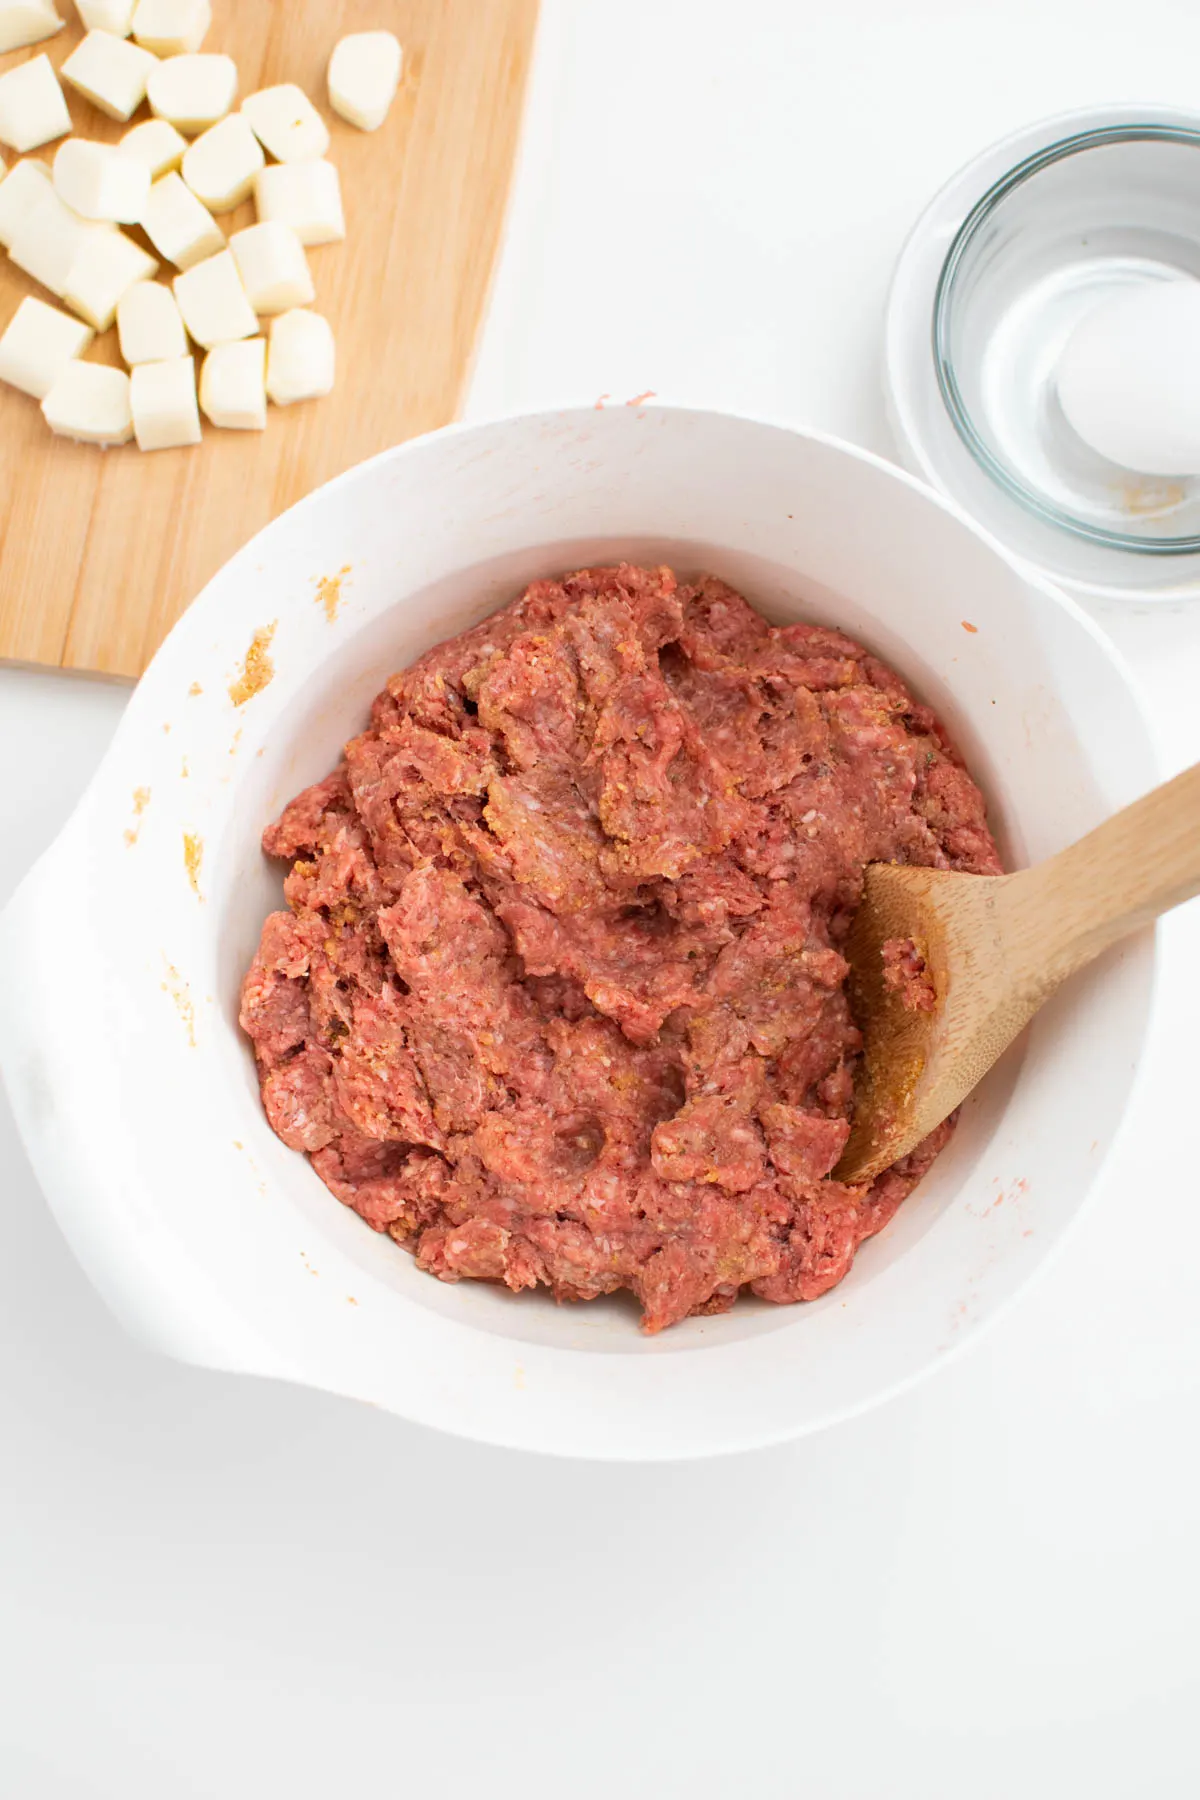 Raw hamburger meat mixture in white bowl with wooden spoon.